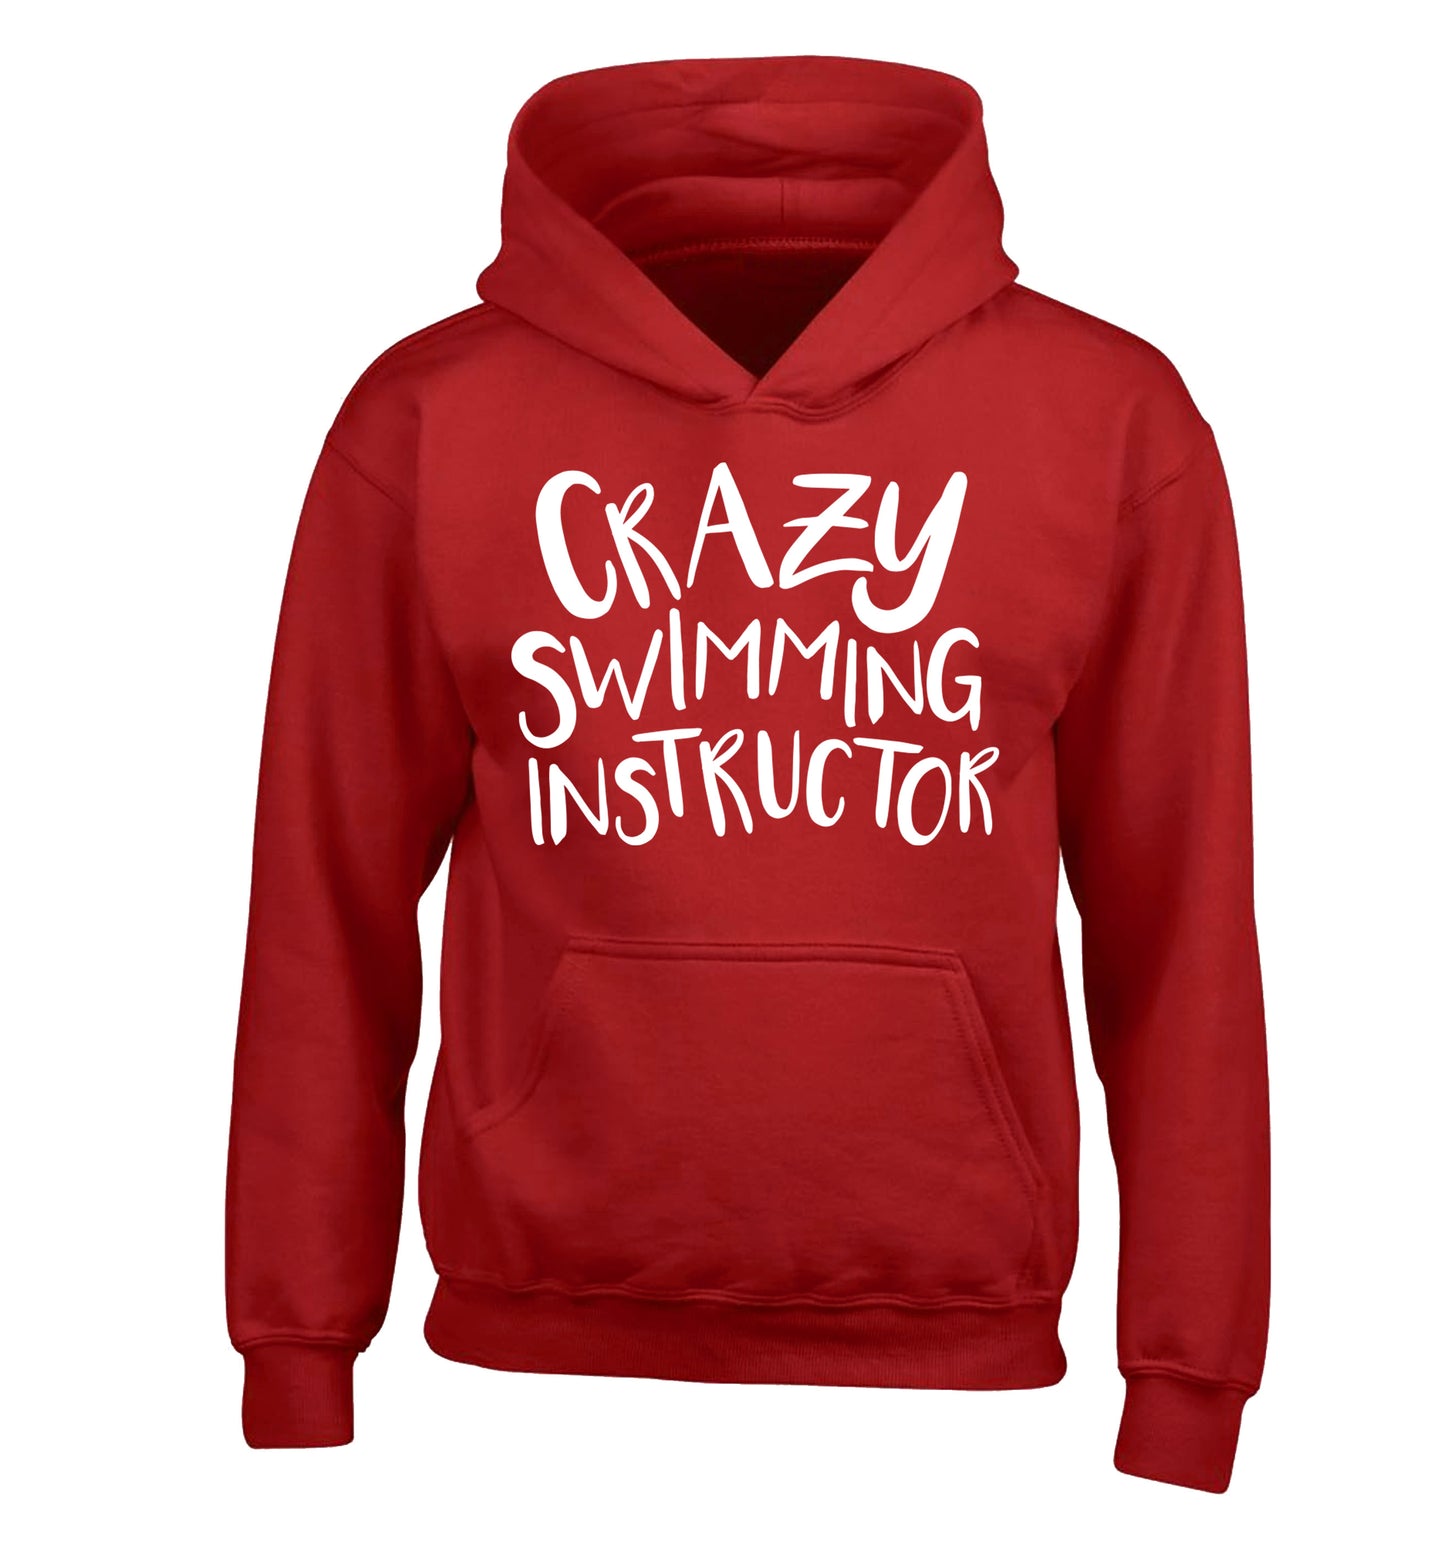 Crazy swimming instructor children's red hoodie 12-13 Years